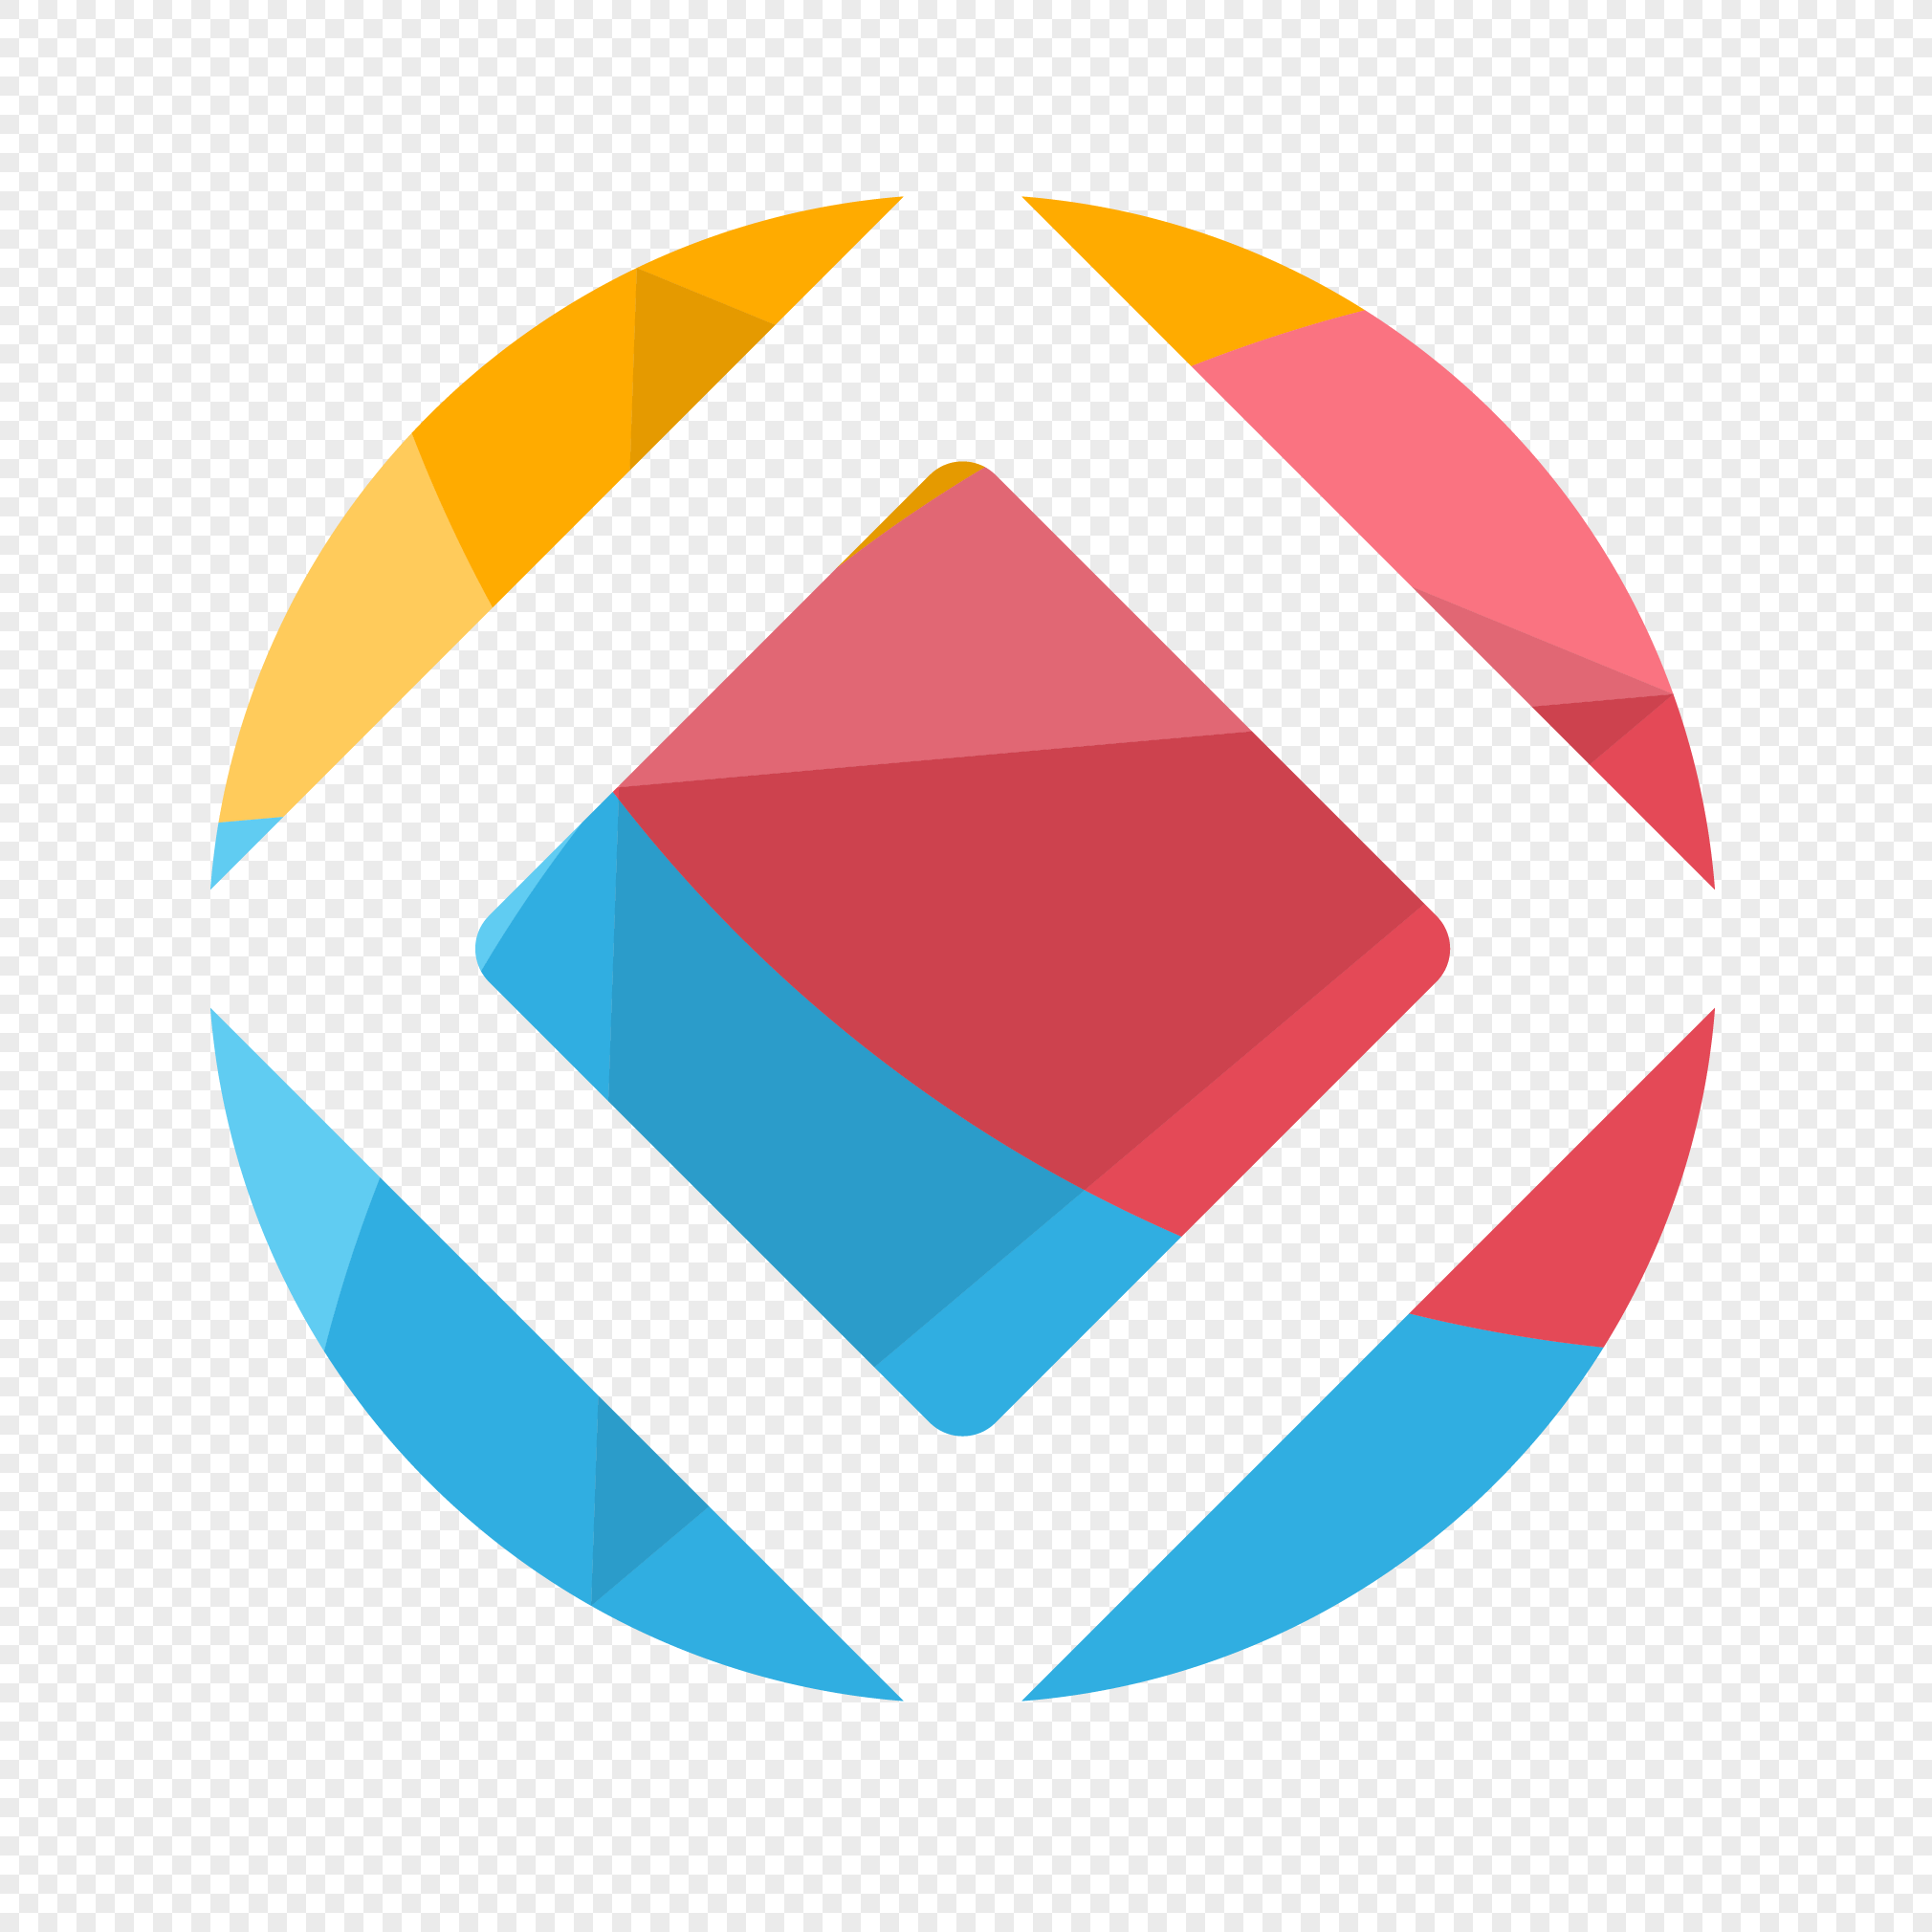 Round Square Logo - Round square geometry logo png image_picture free download